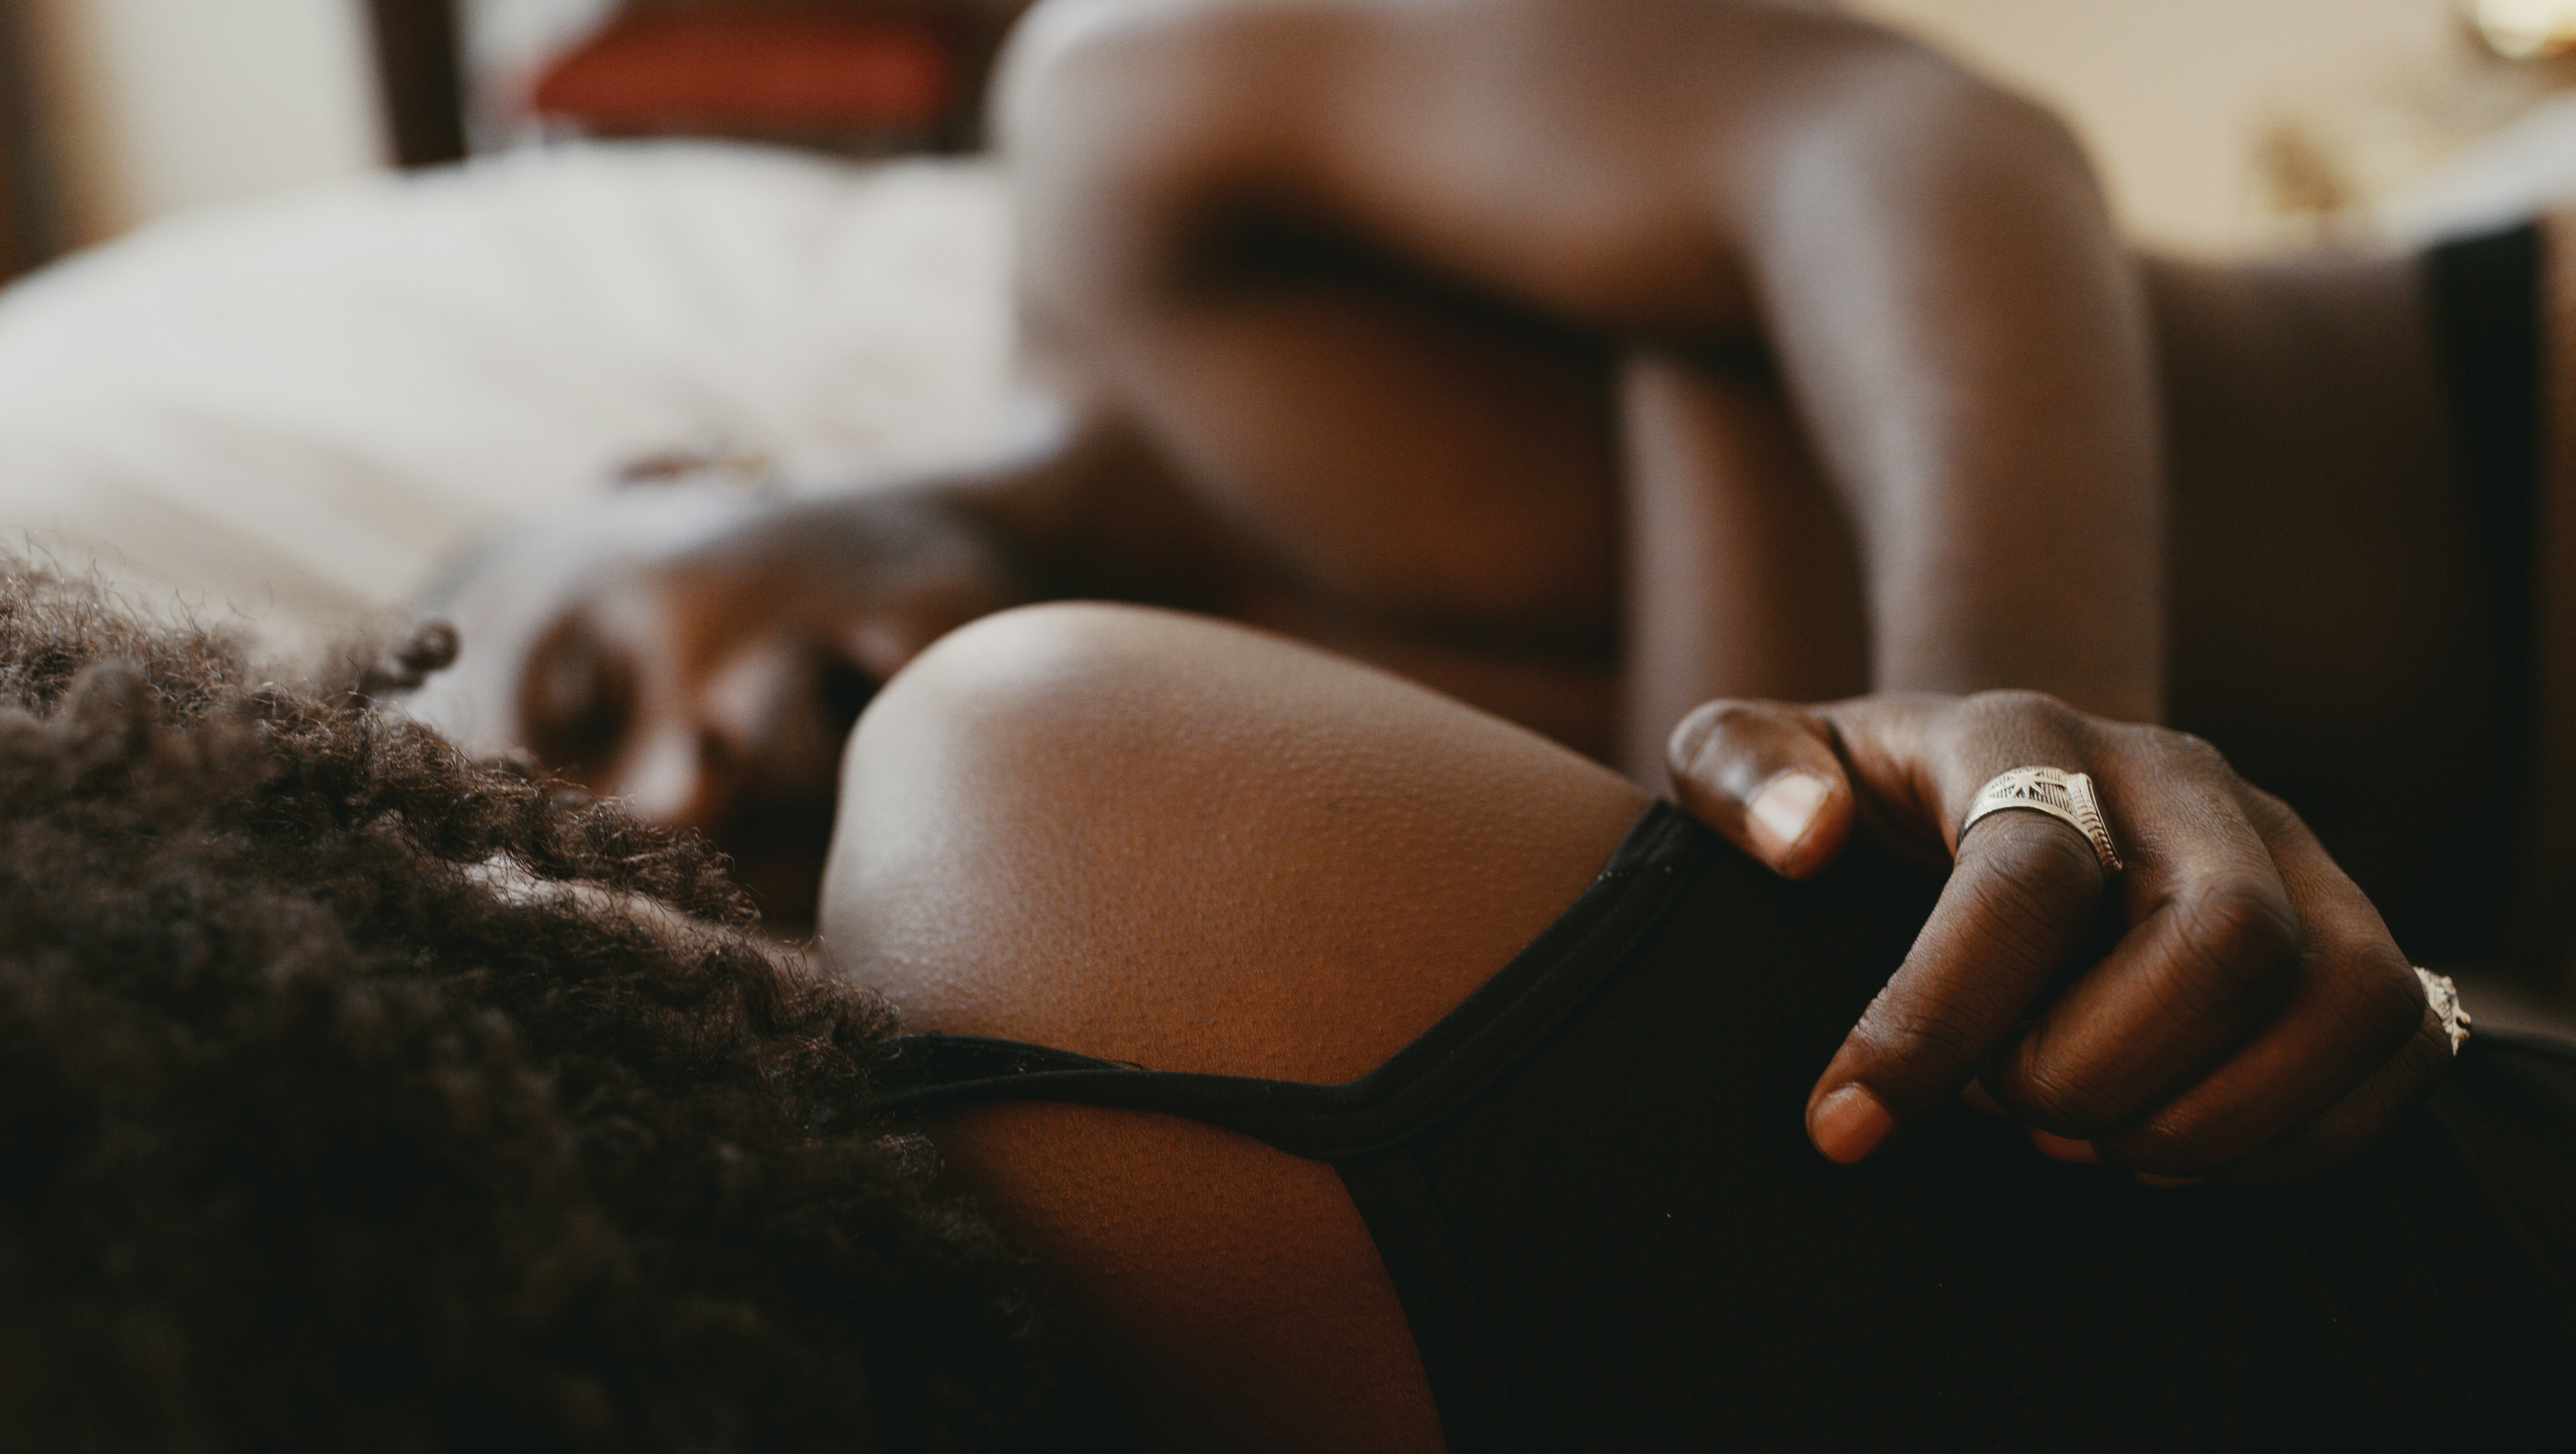 7 Fingering Sex Tips To Help Your Partner Rub You The Right